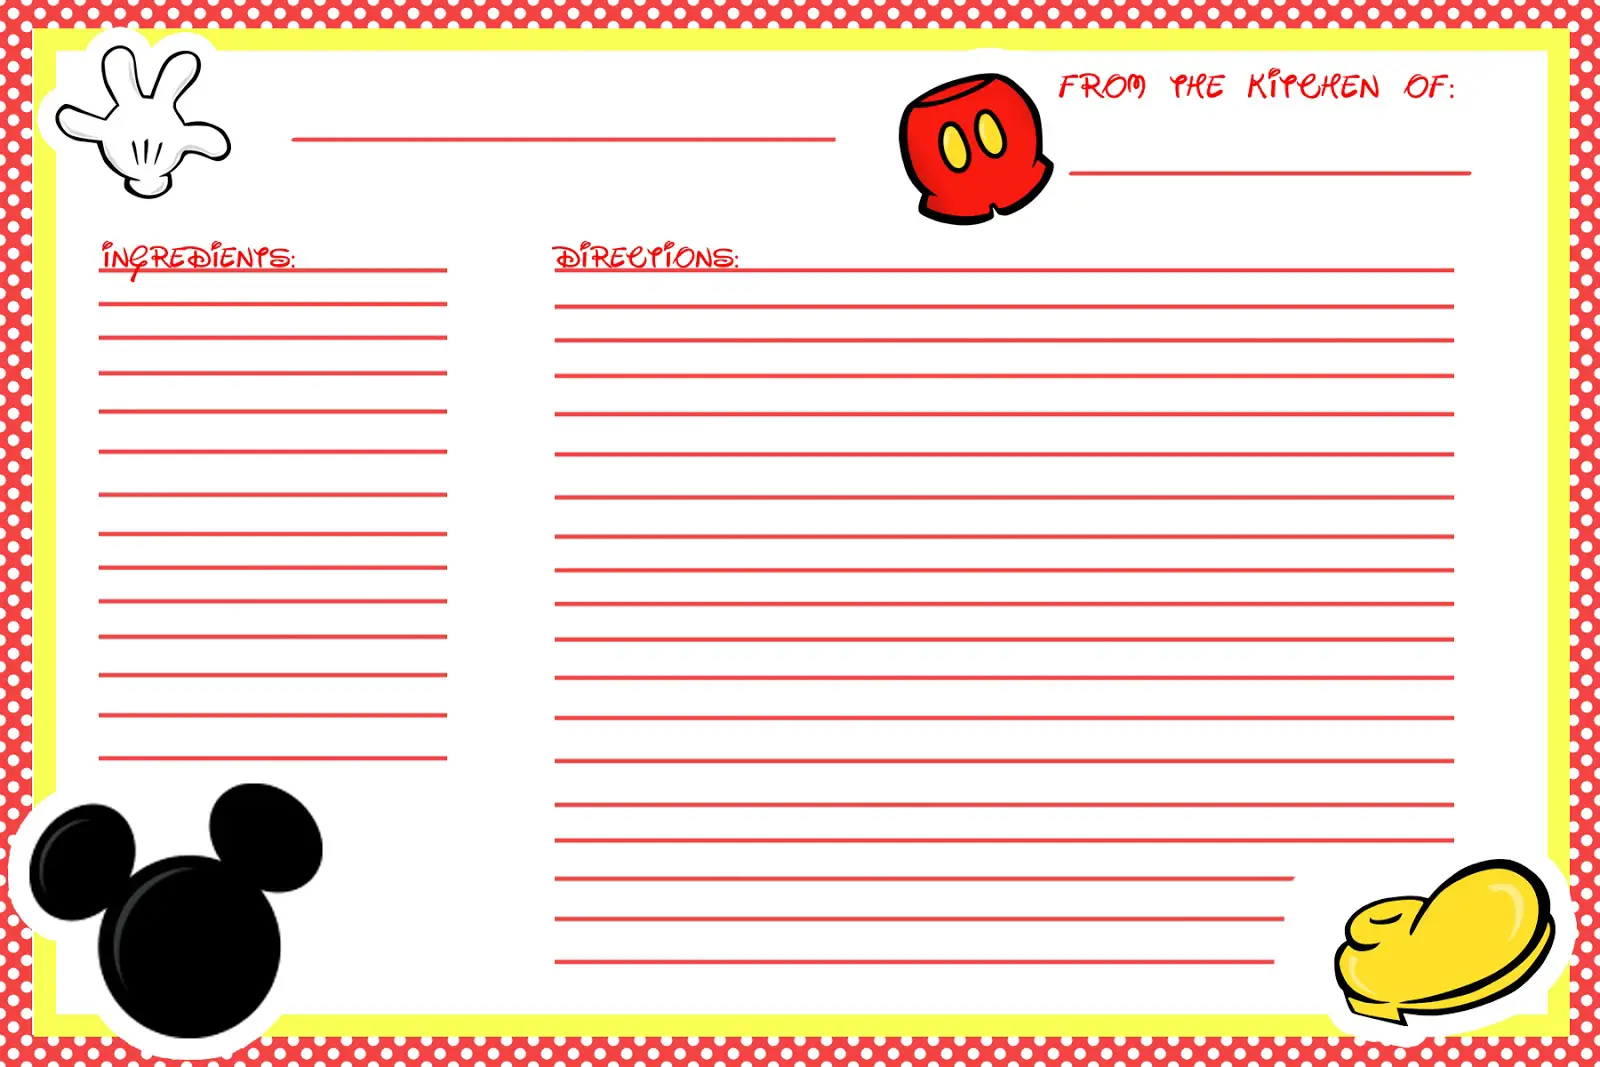 70 Cool Recipe  Cards  KittyBabyLove com